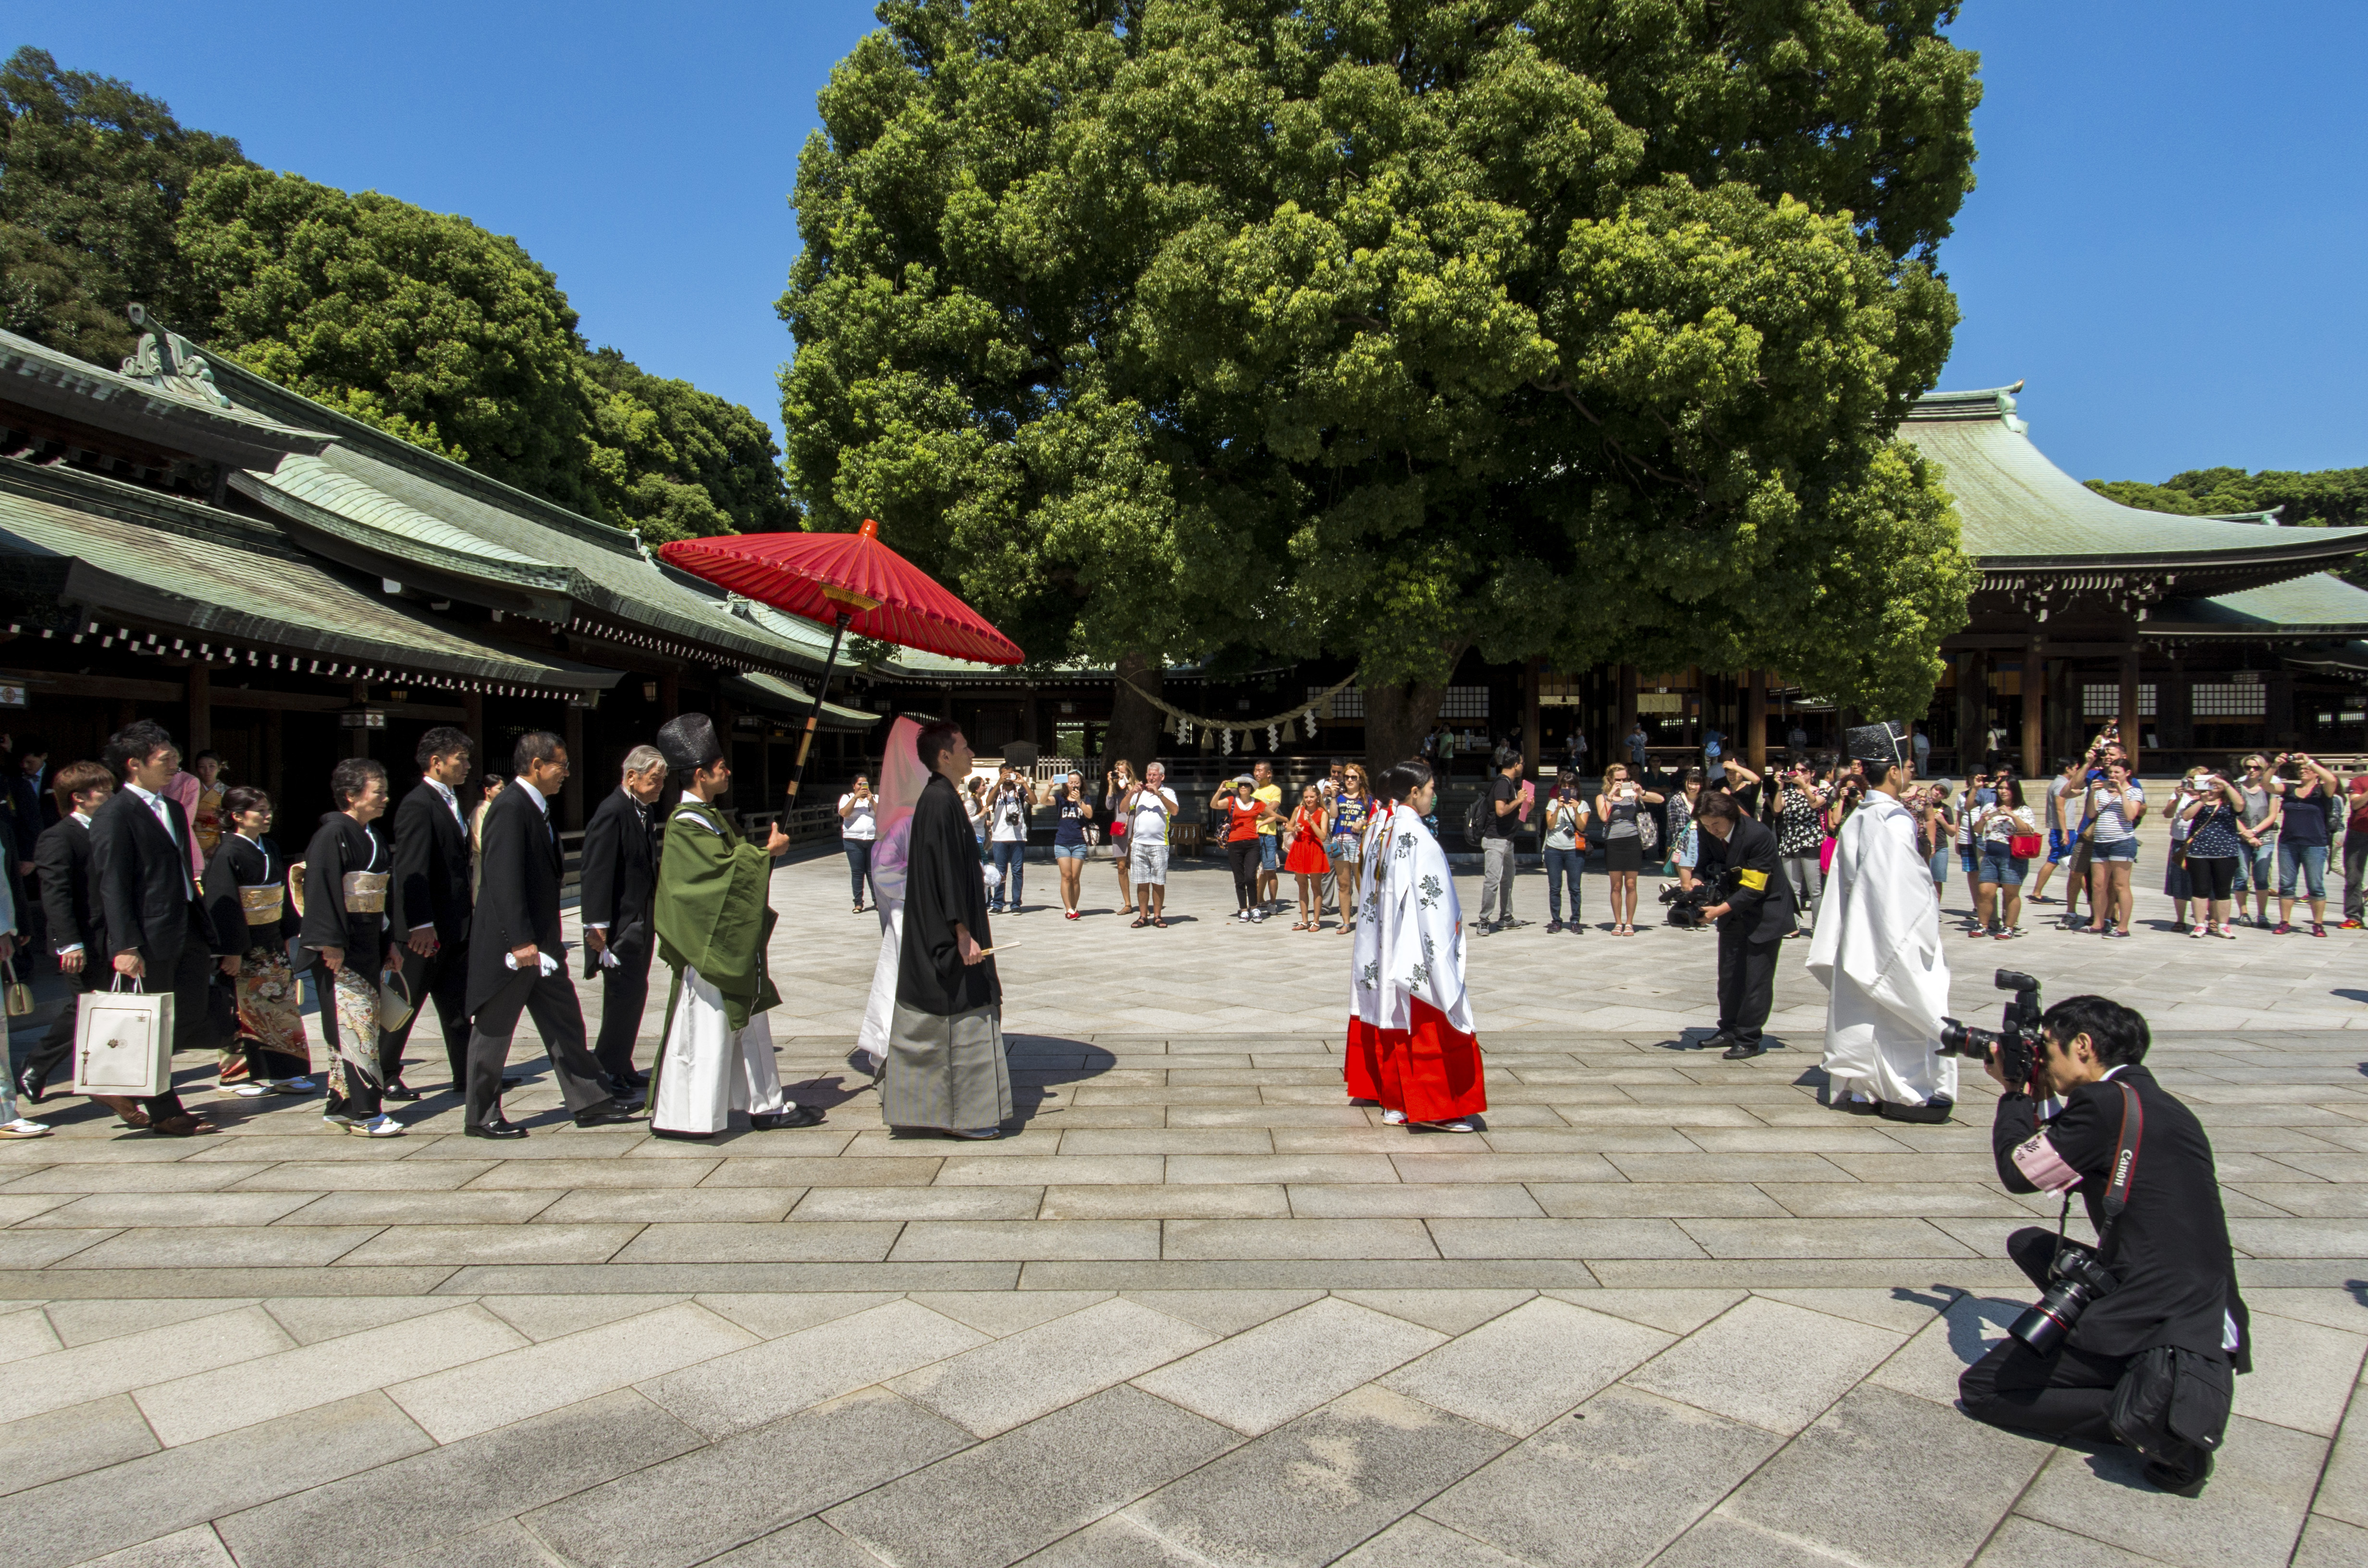 The big day: A wedding procession marches through a shrine, a more public affair than the nuptials of many celebrities. | ISTOCK